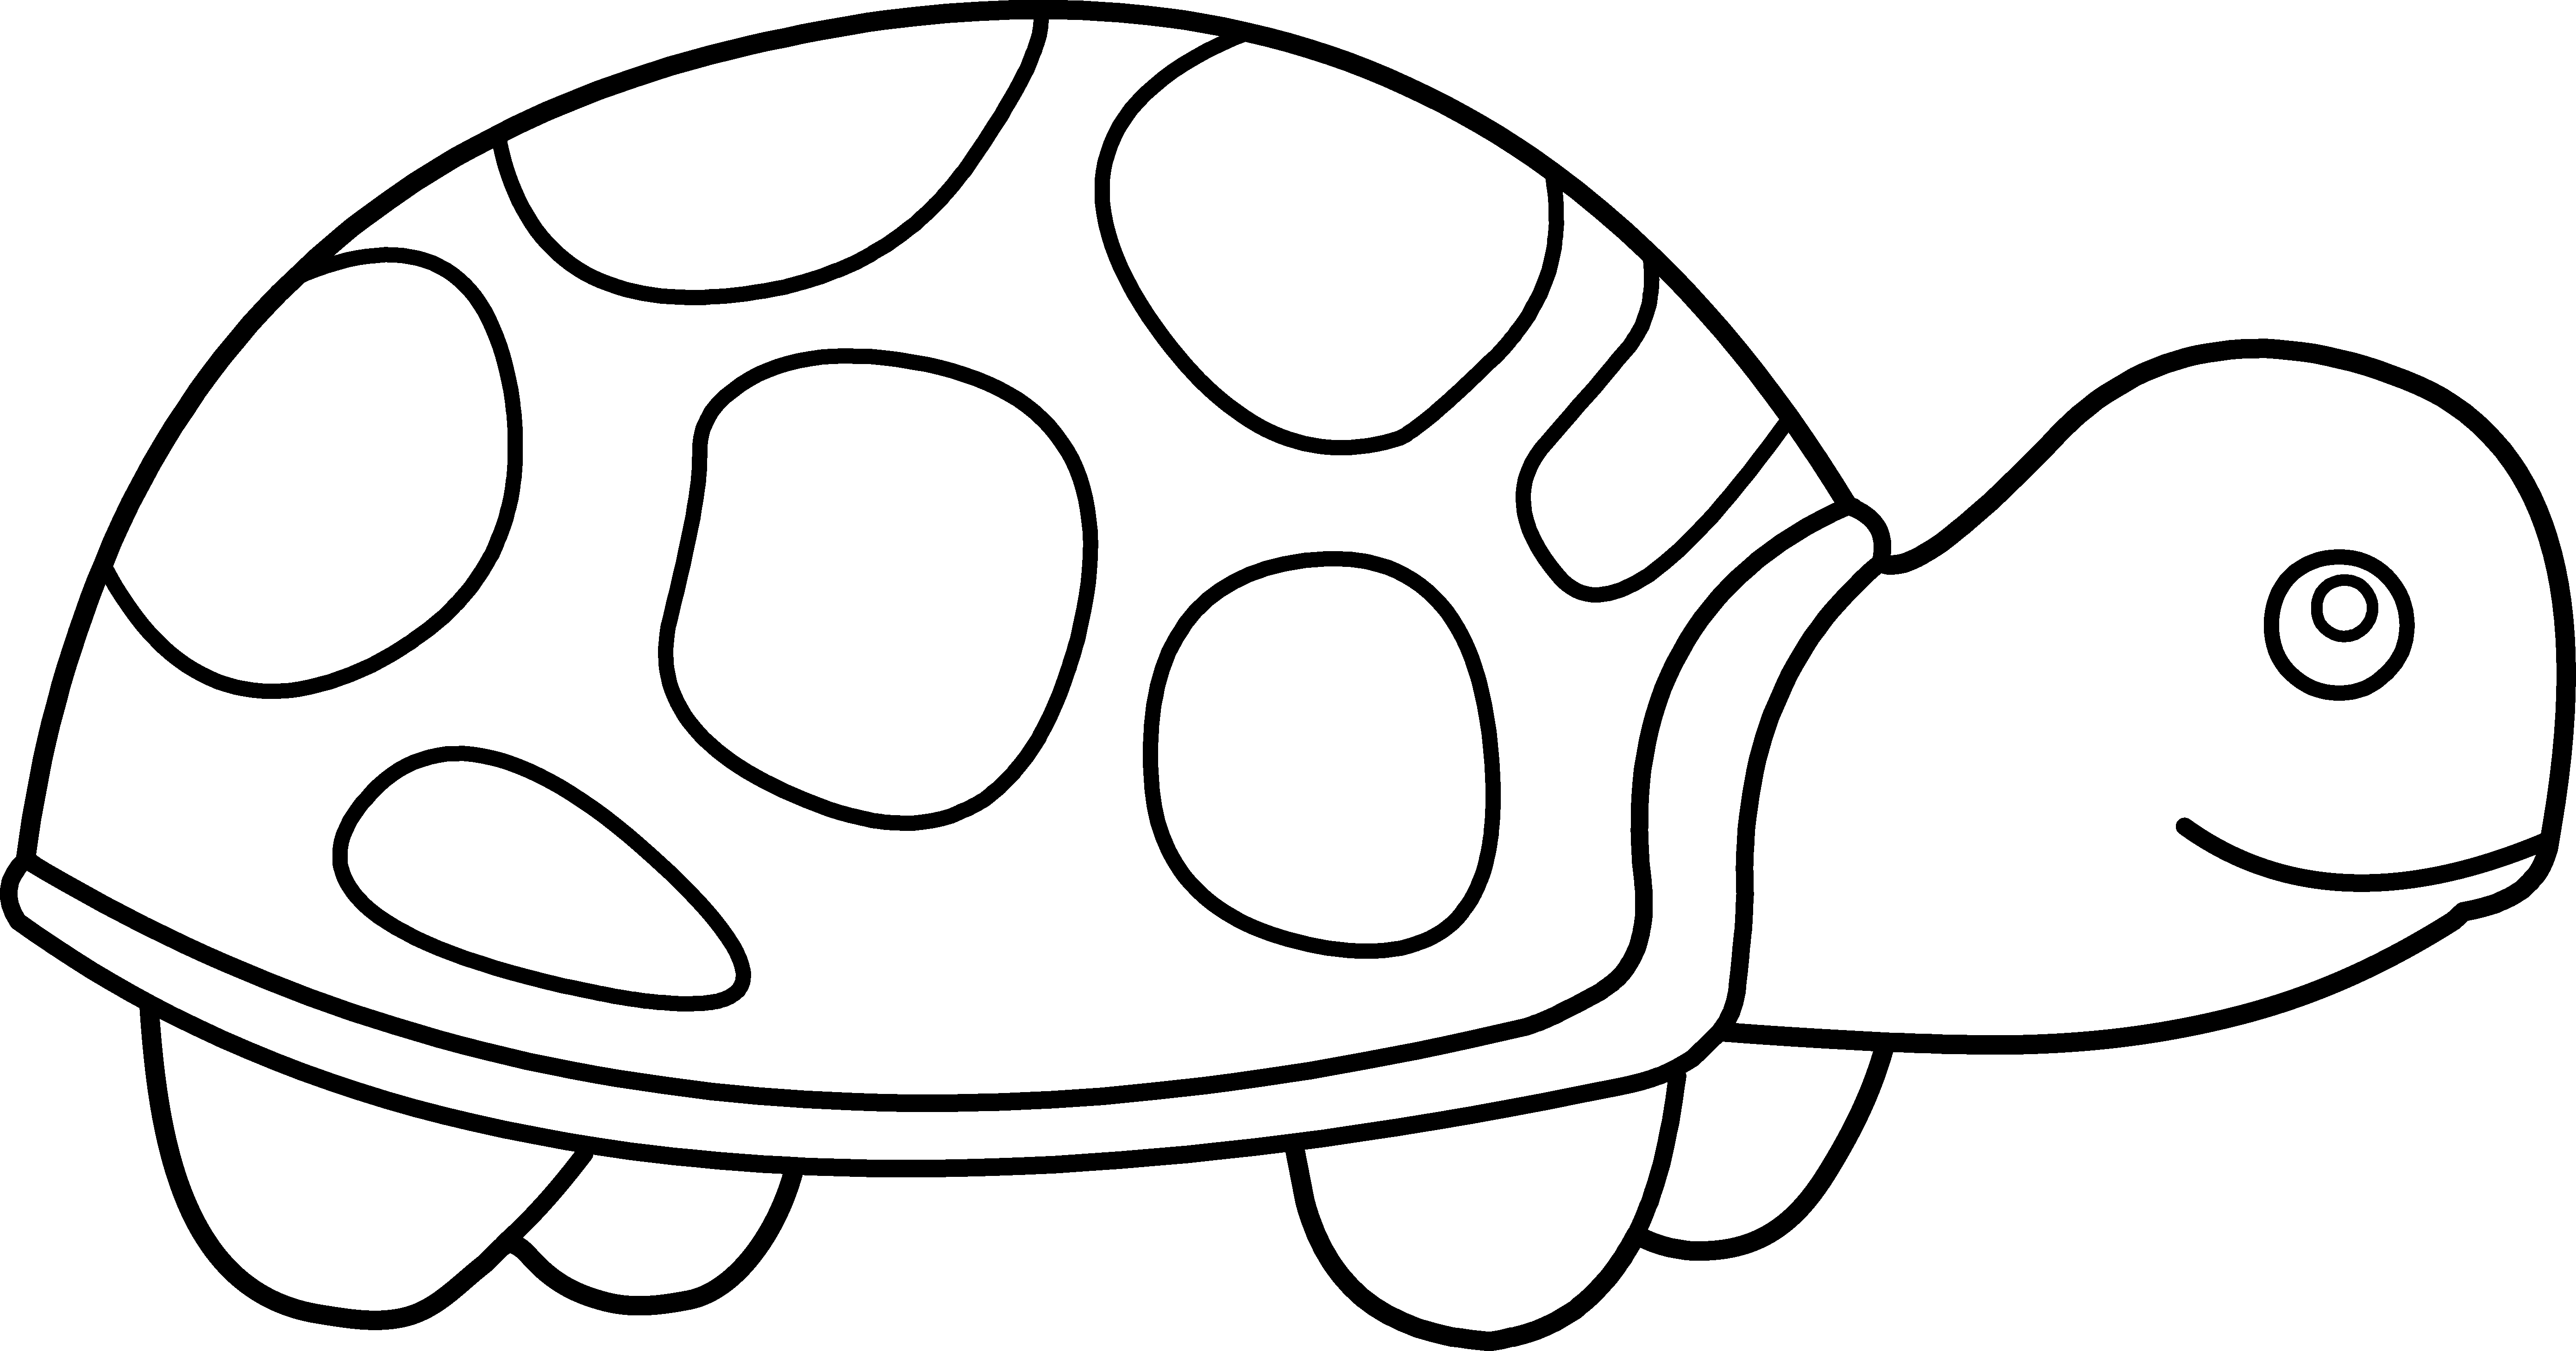 Cute Turtle Coloring Page - Free Clip Art